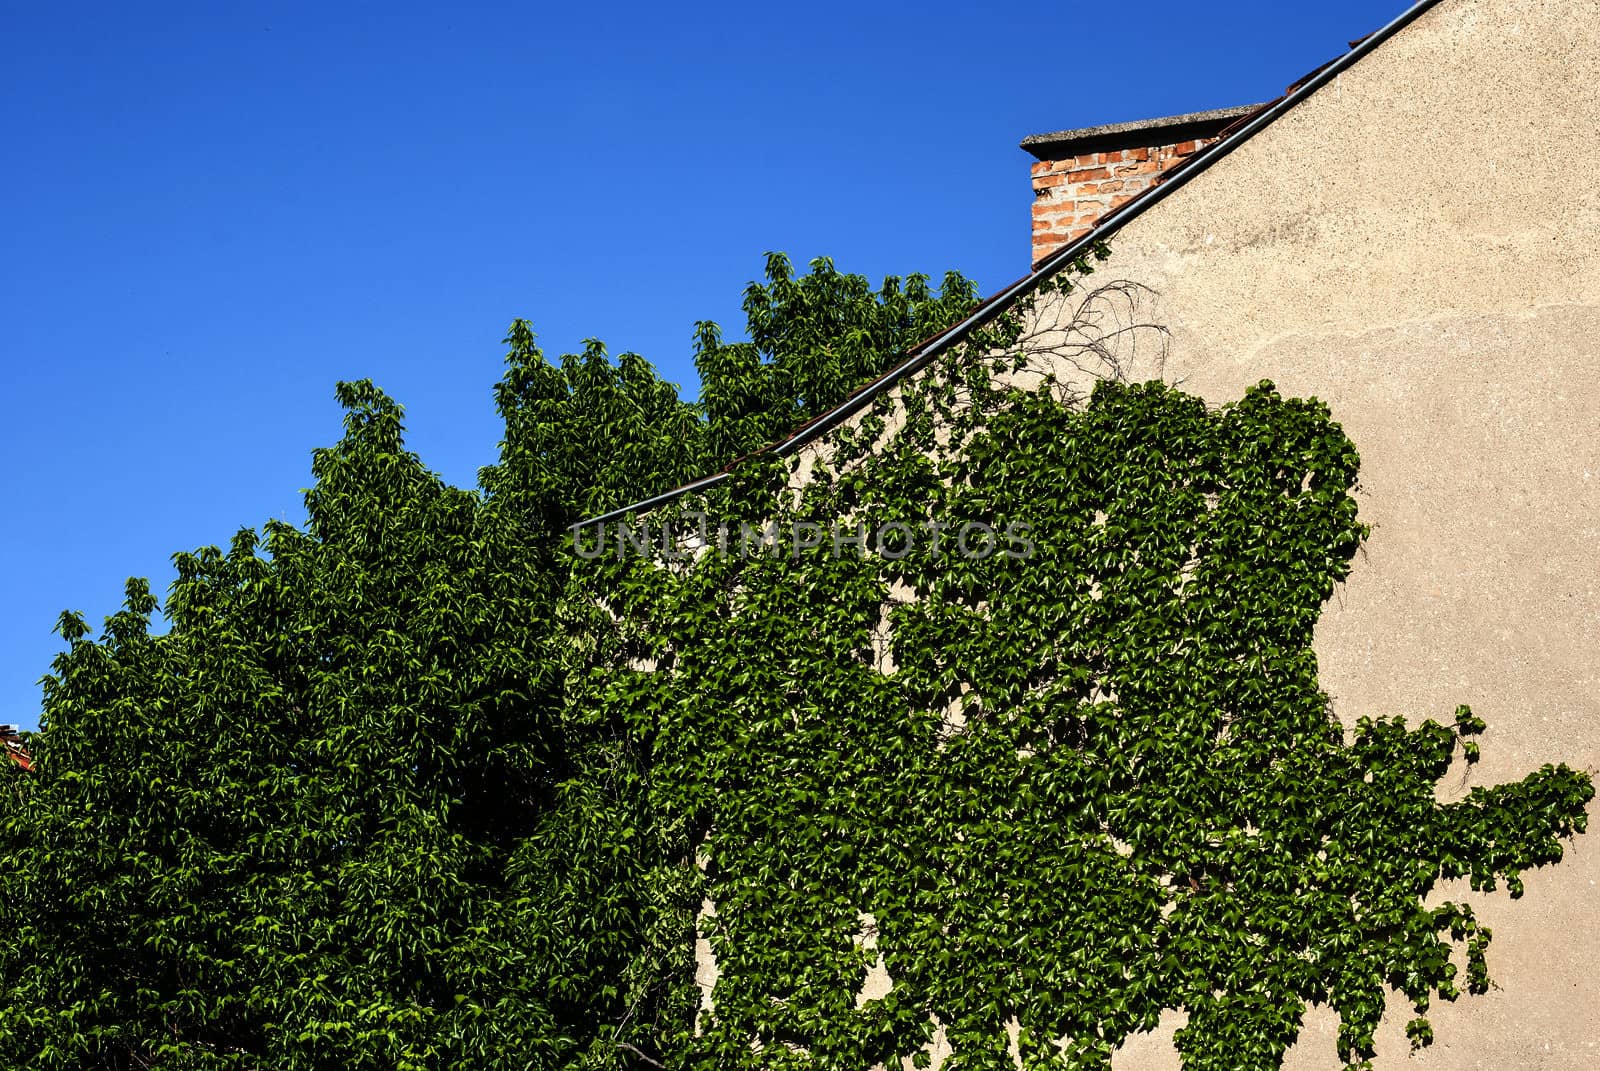 House wall with climbing plants in sunny day